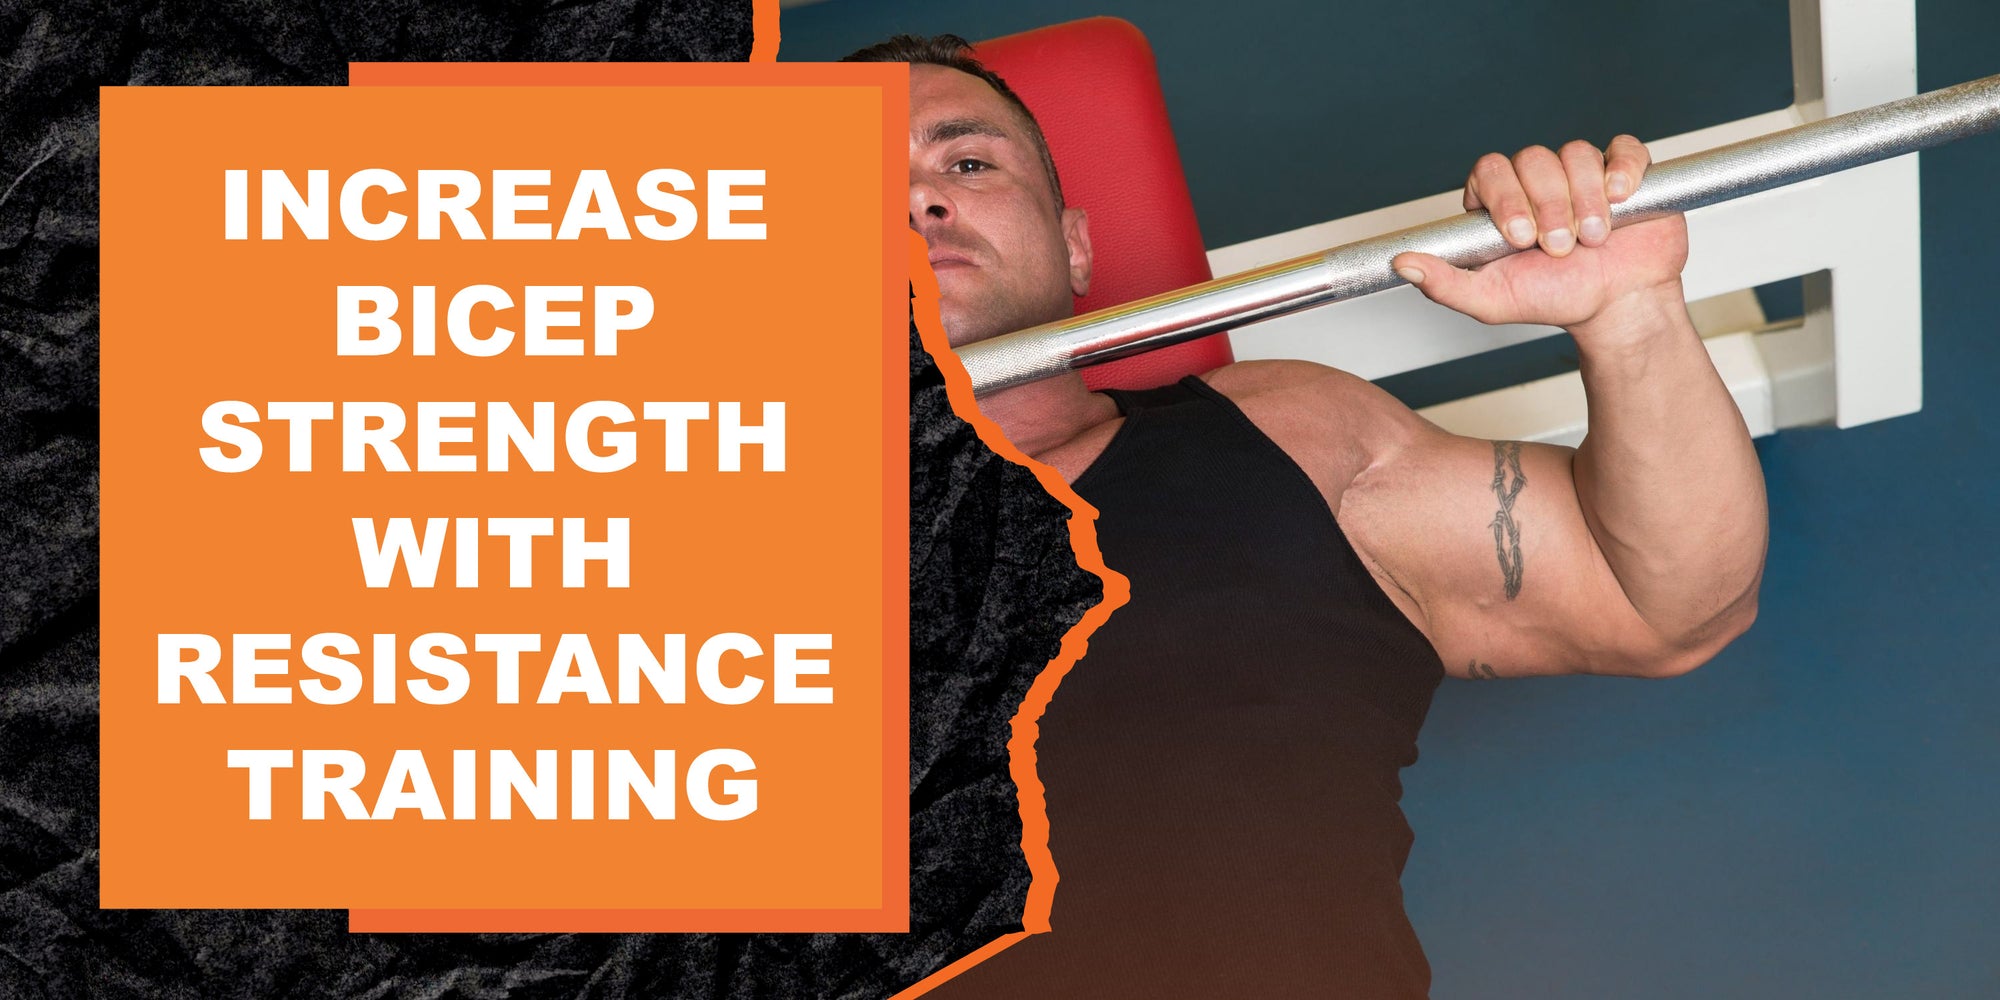 How to Increase Bicep Size and Strength with Resistance Training